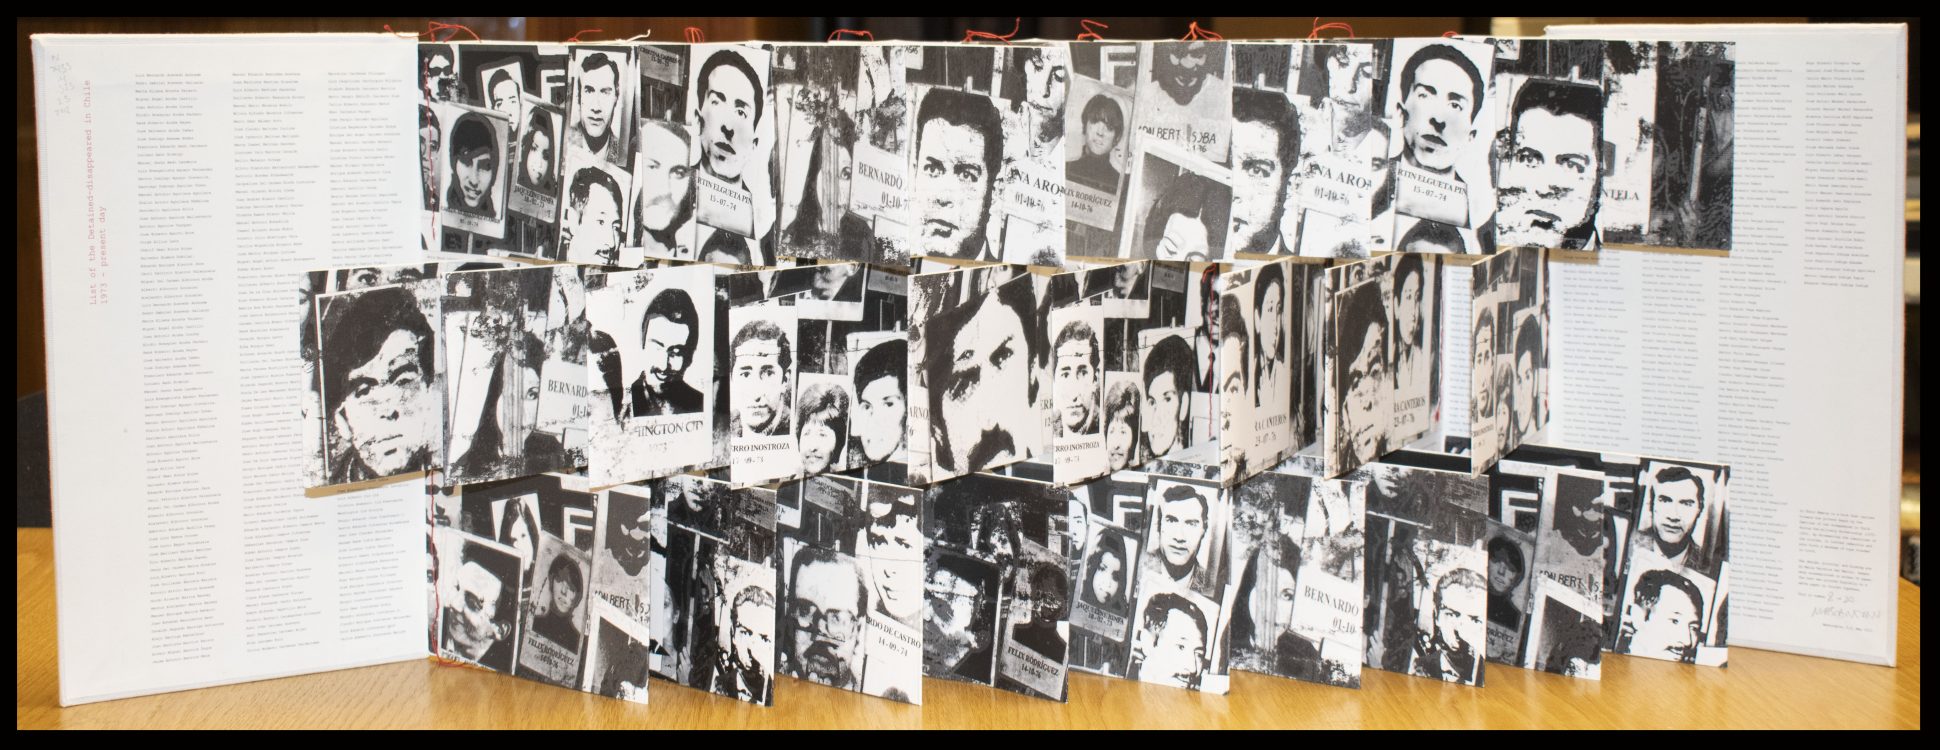 In Their Memory: Human Rights Violations in Chile, 1973 – 1990